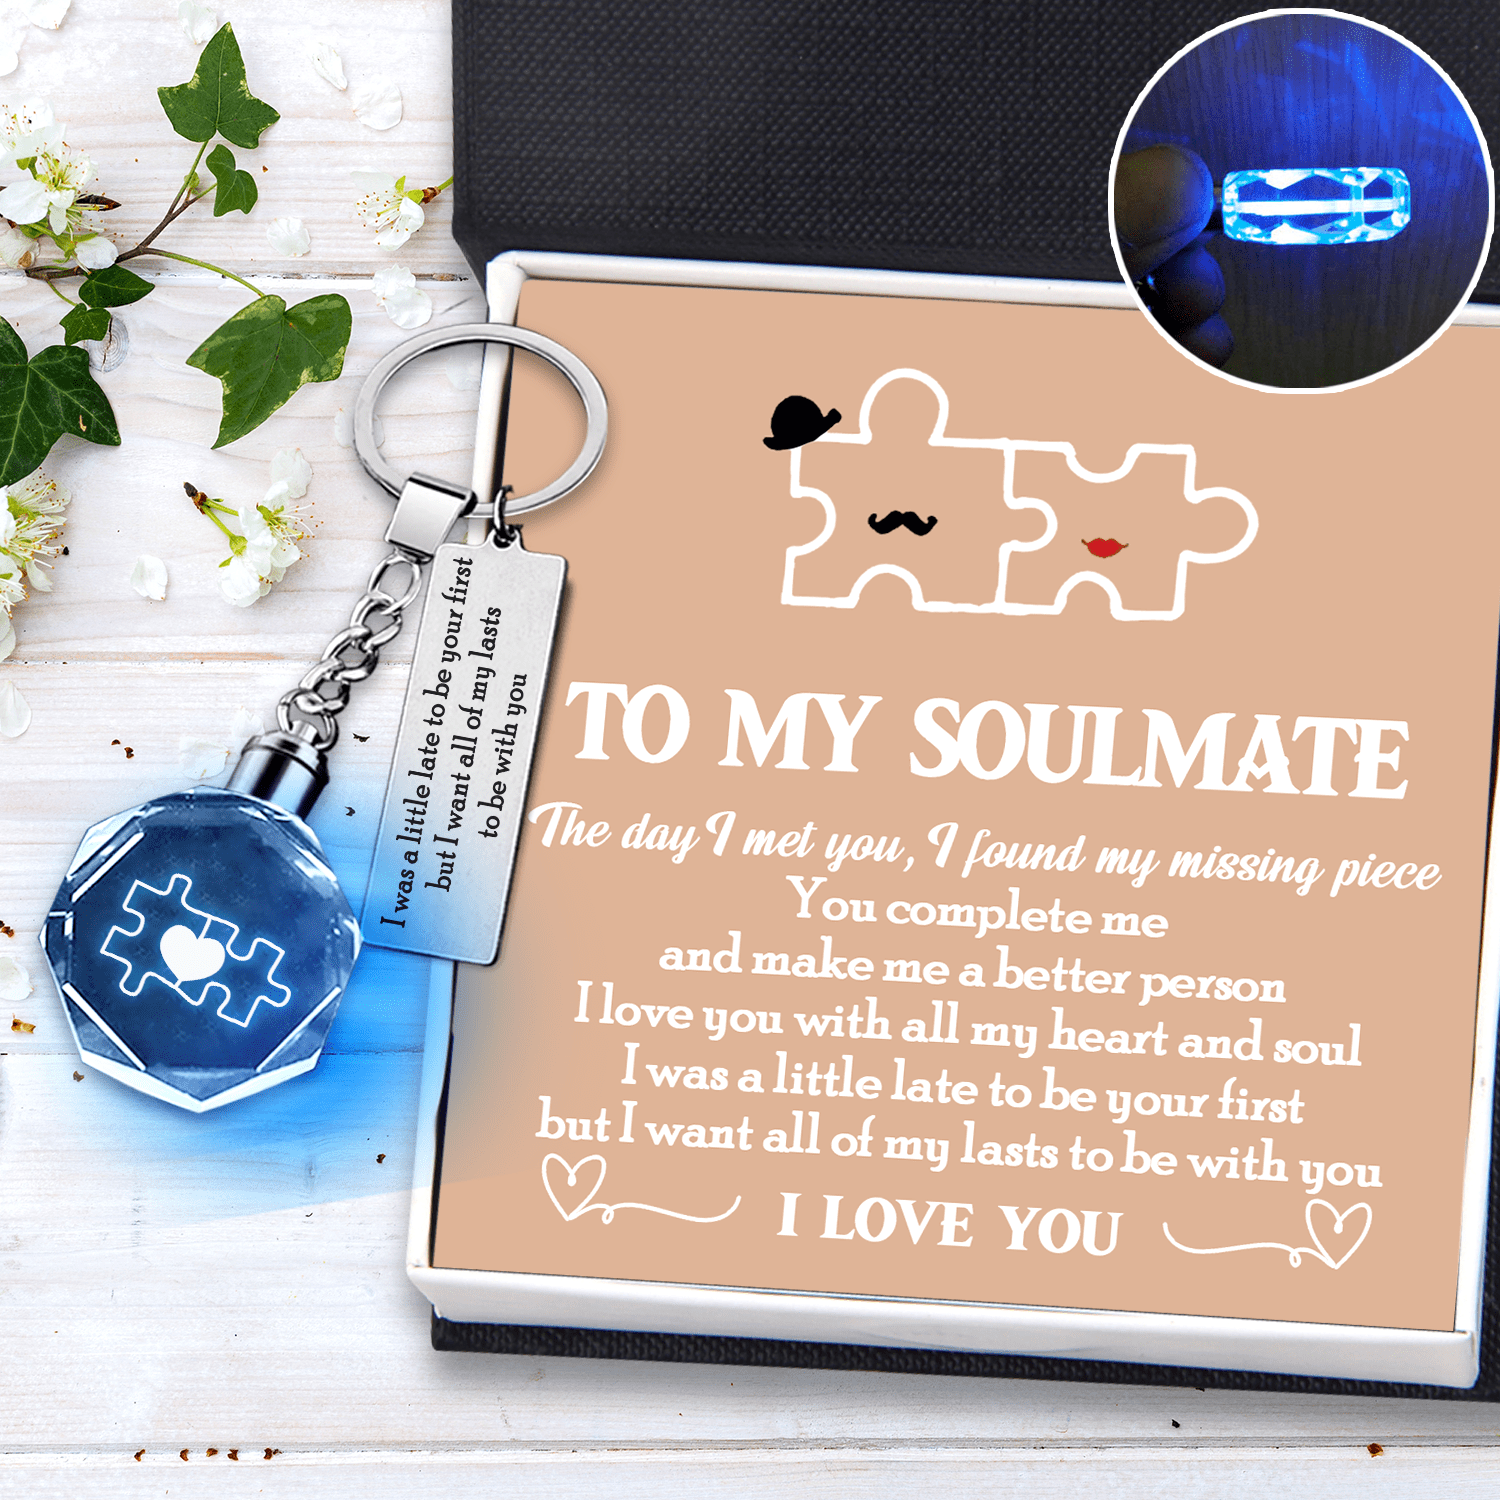 Led Light Keychain - Family - To My Soulmate - I Want All Of My Last To Be With You - Gkwl13004